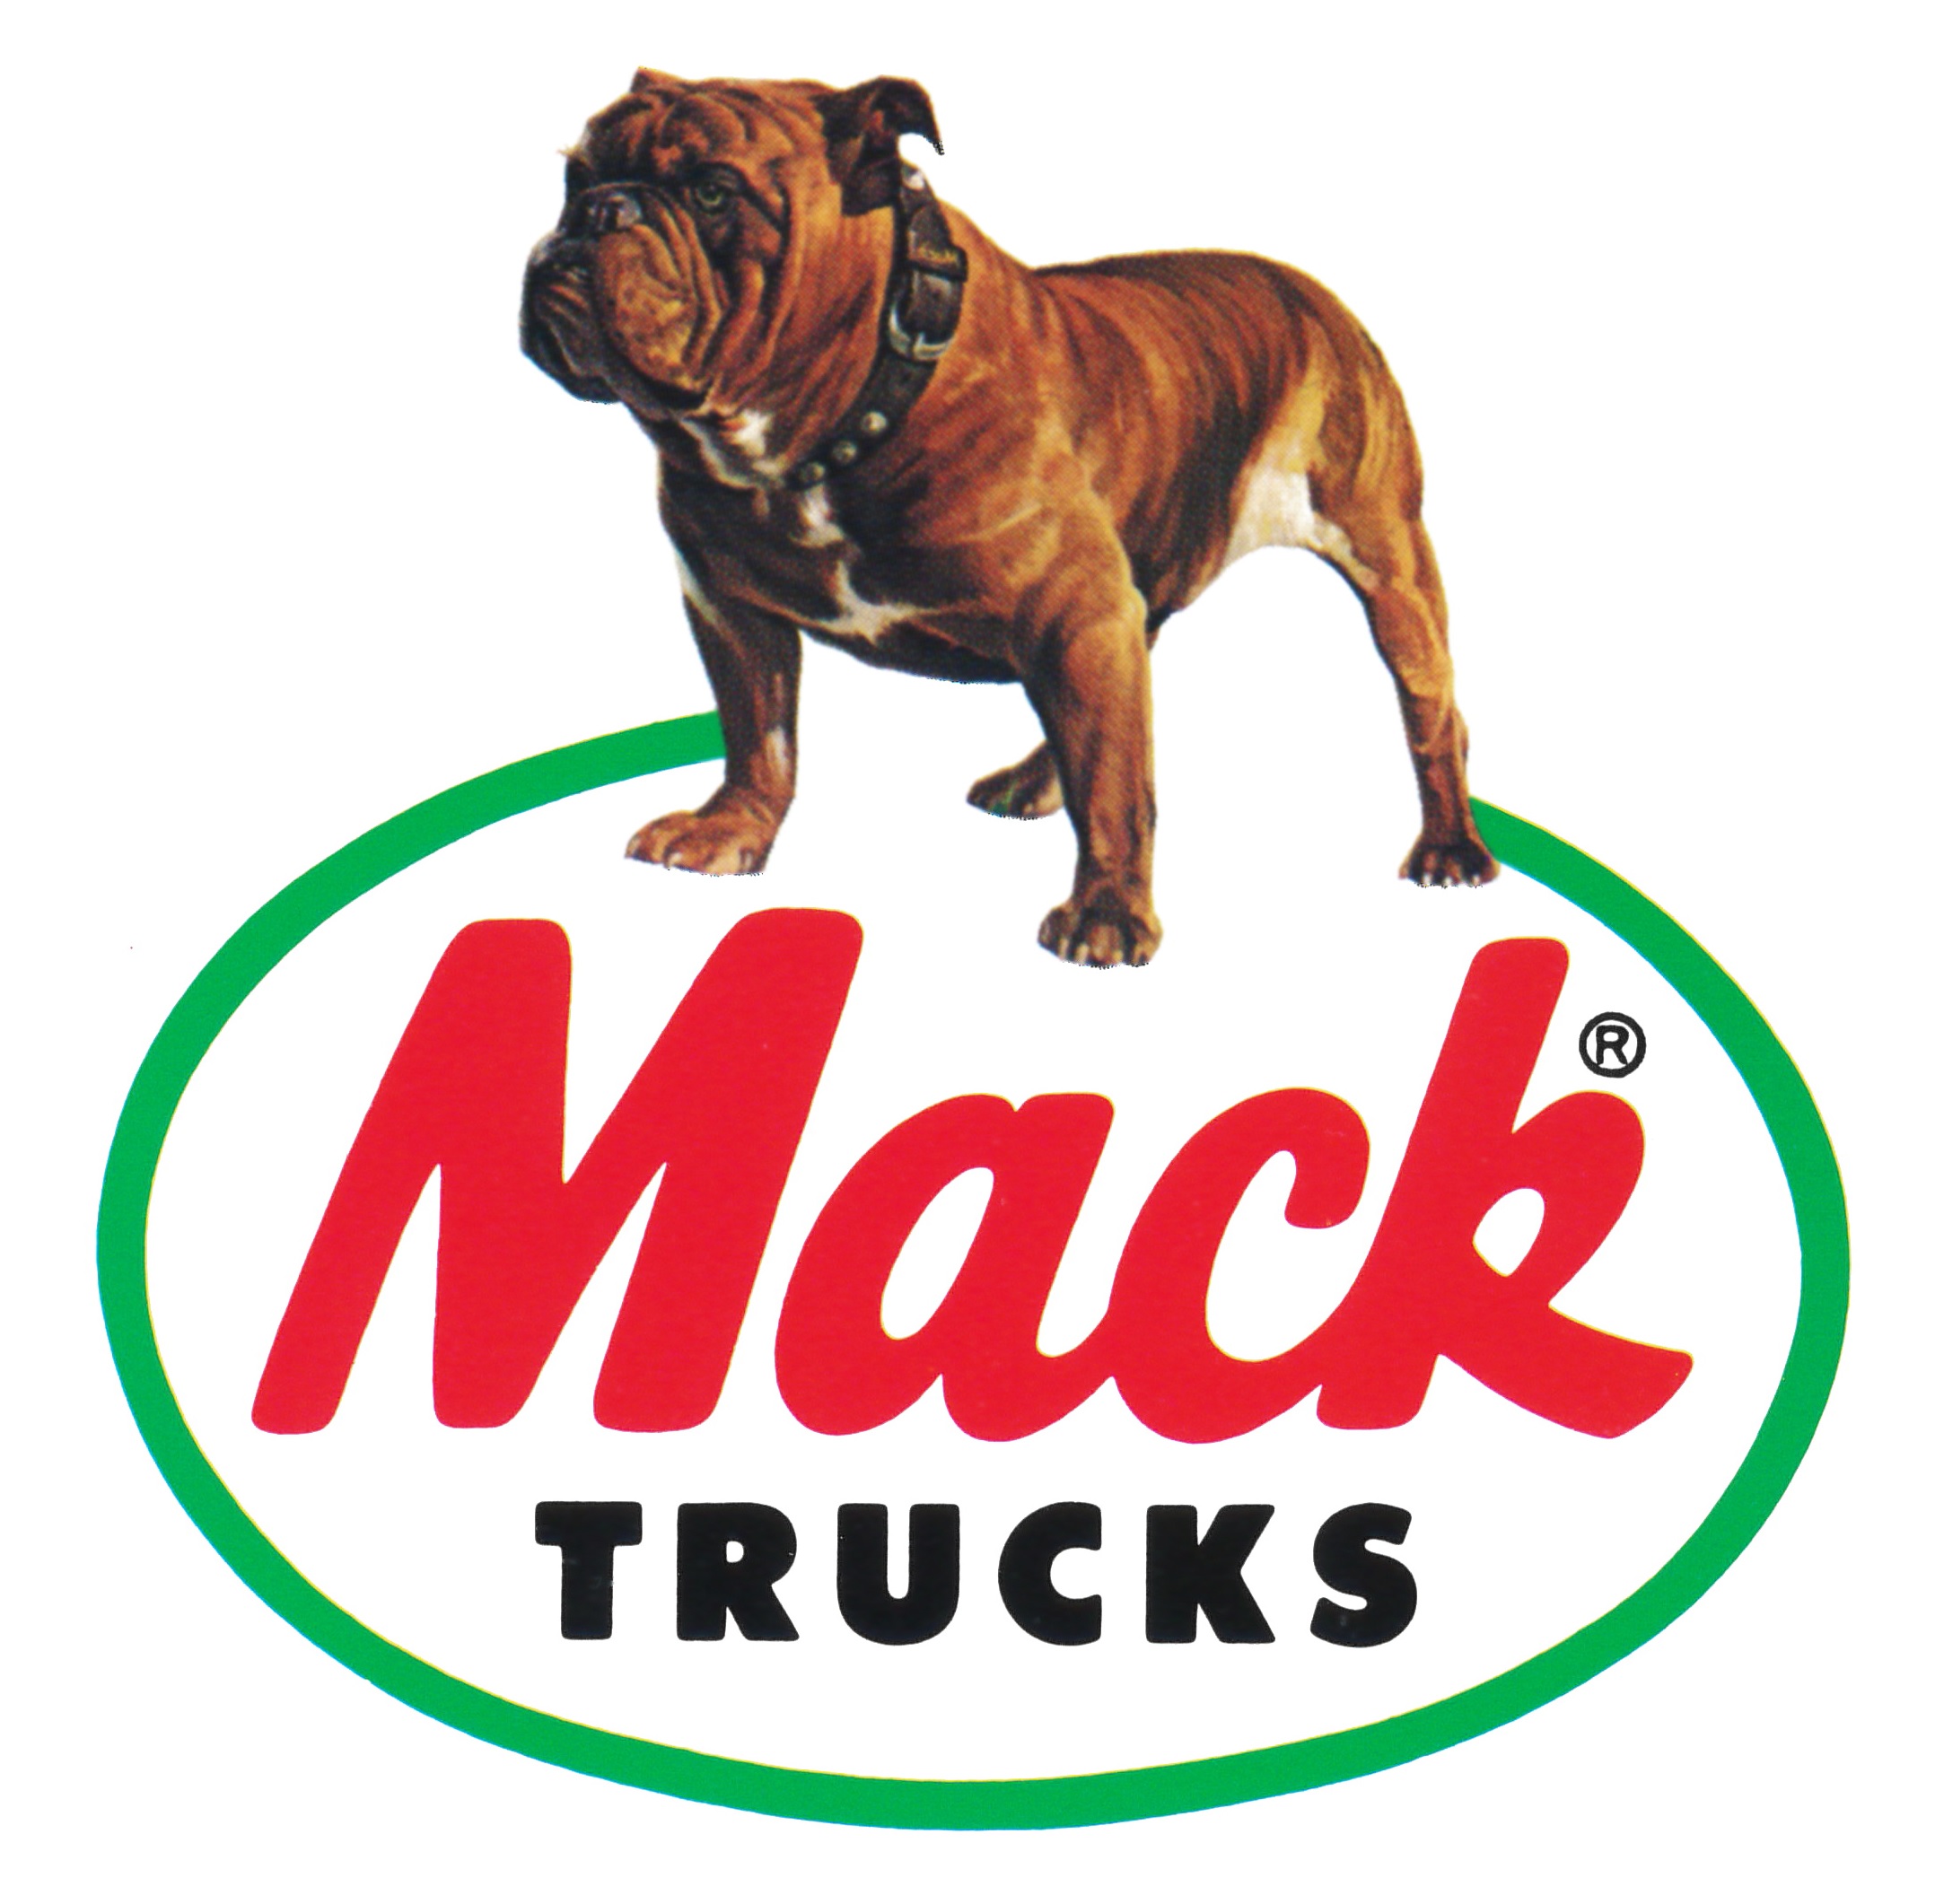 Click here to go to the Mack Trucks website.